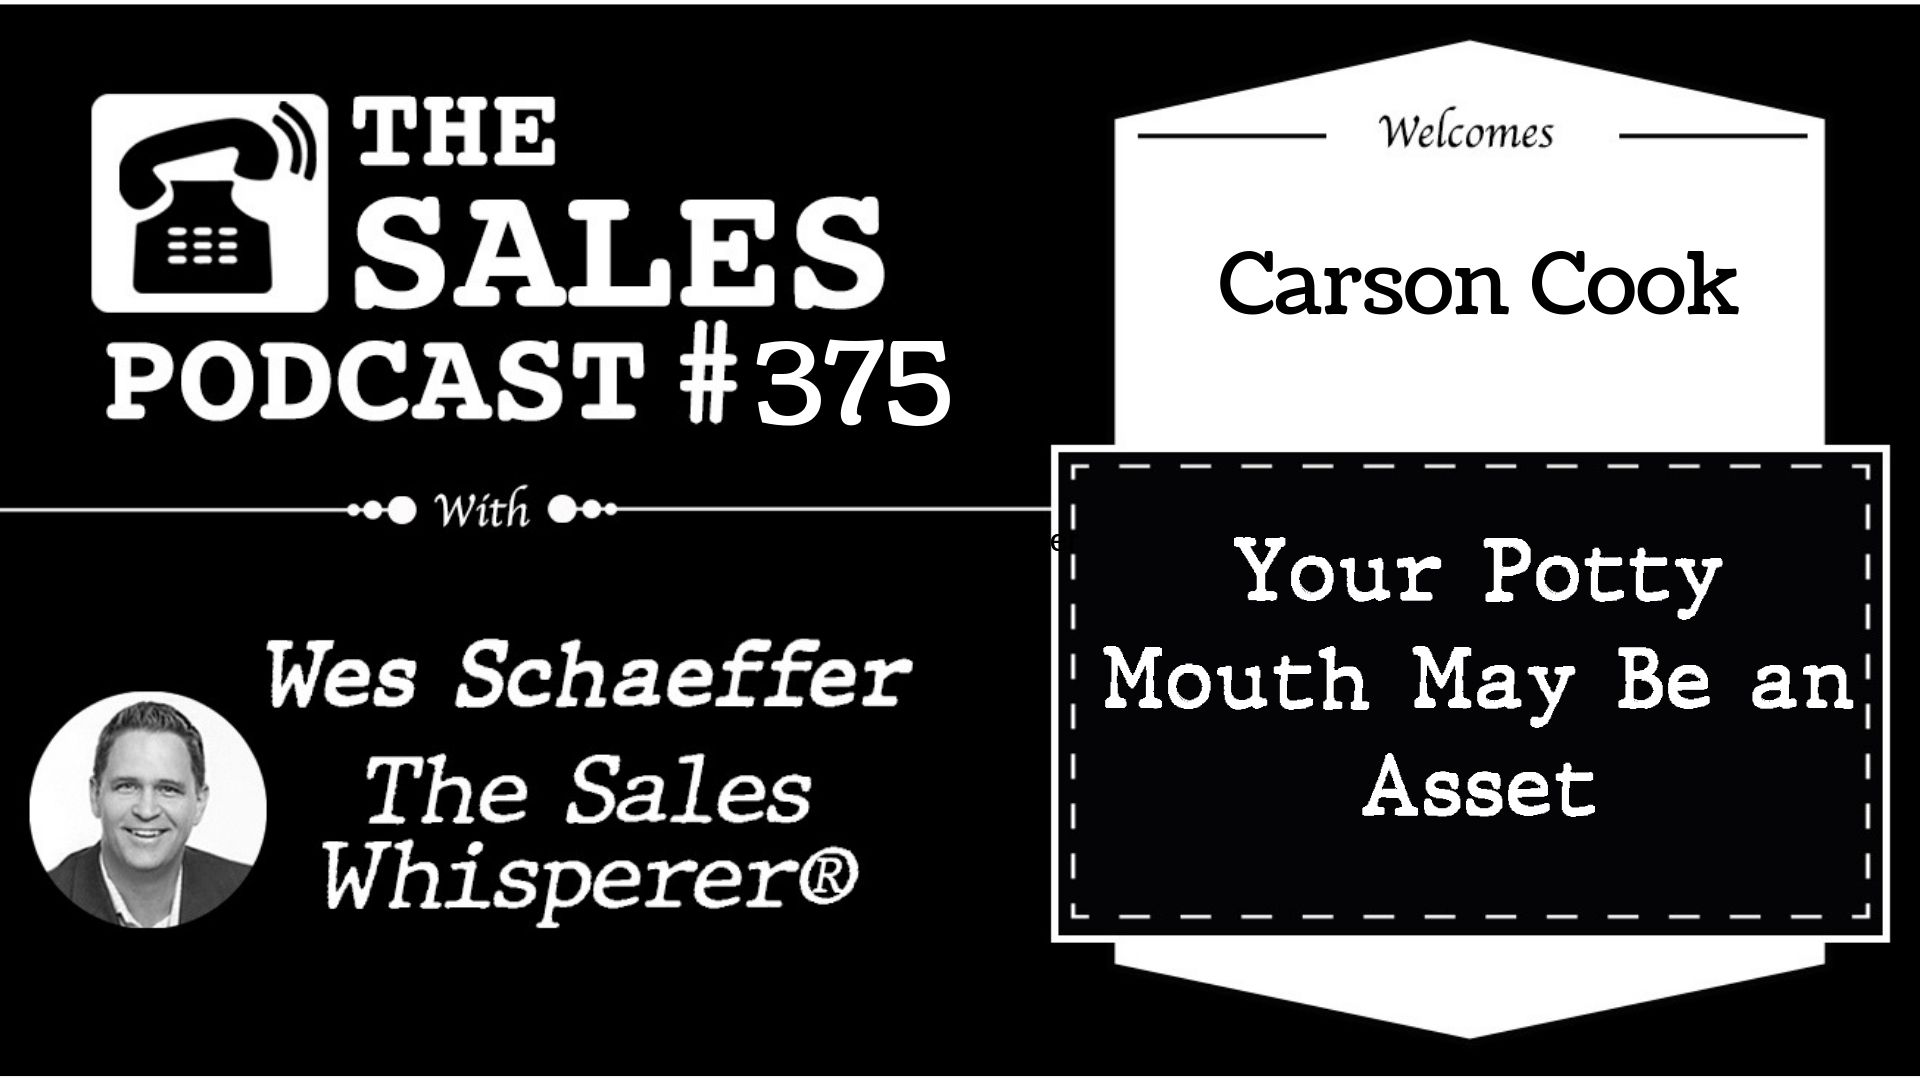 The No Shit Sales Journal Sales Creator, Carson Cook